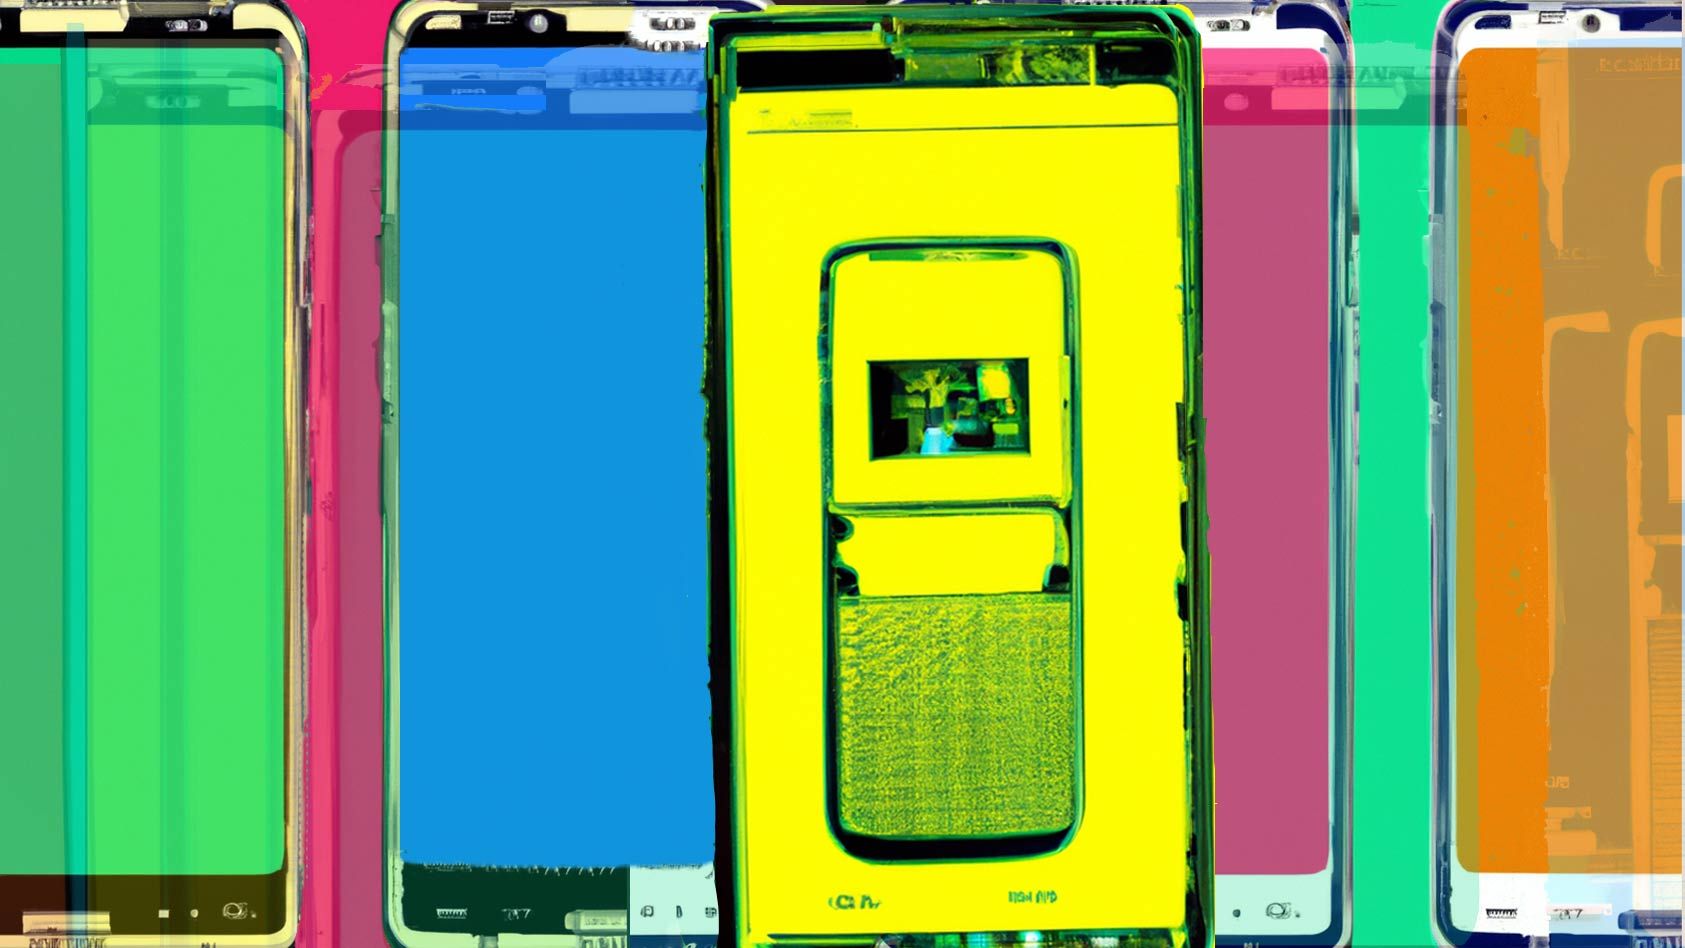 An illustration of various phones with bright screens and a yellow phone with an image of another phone in the forefront.